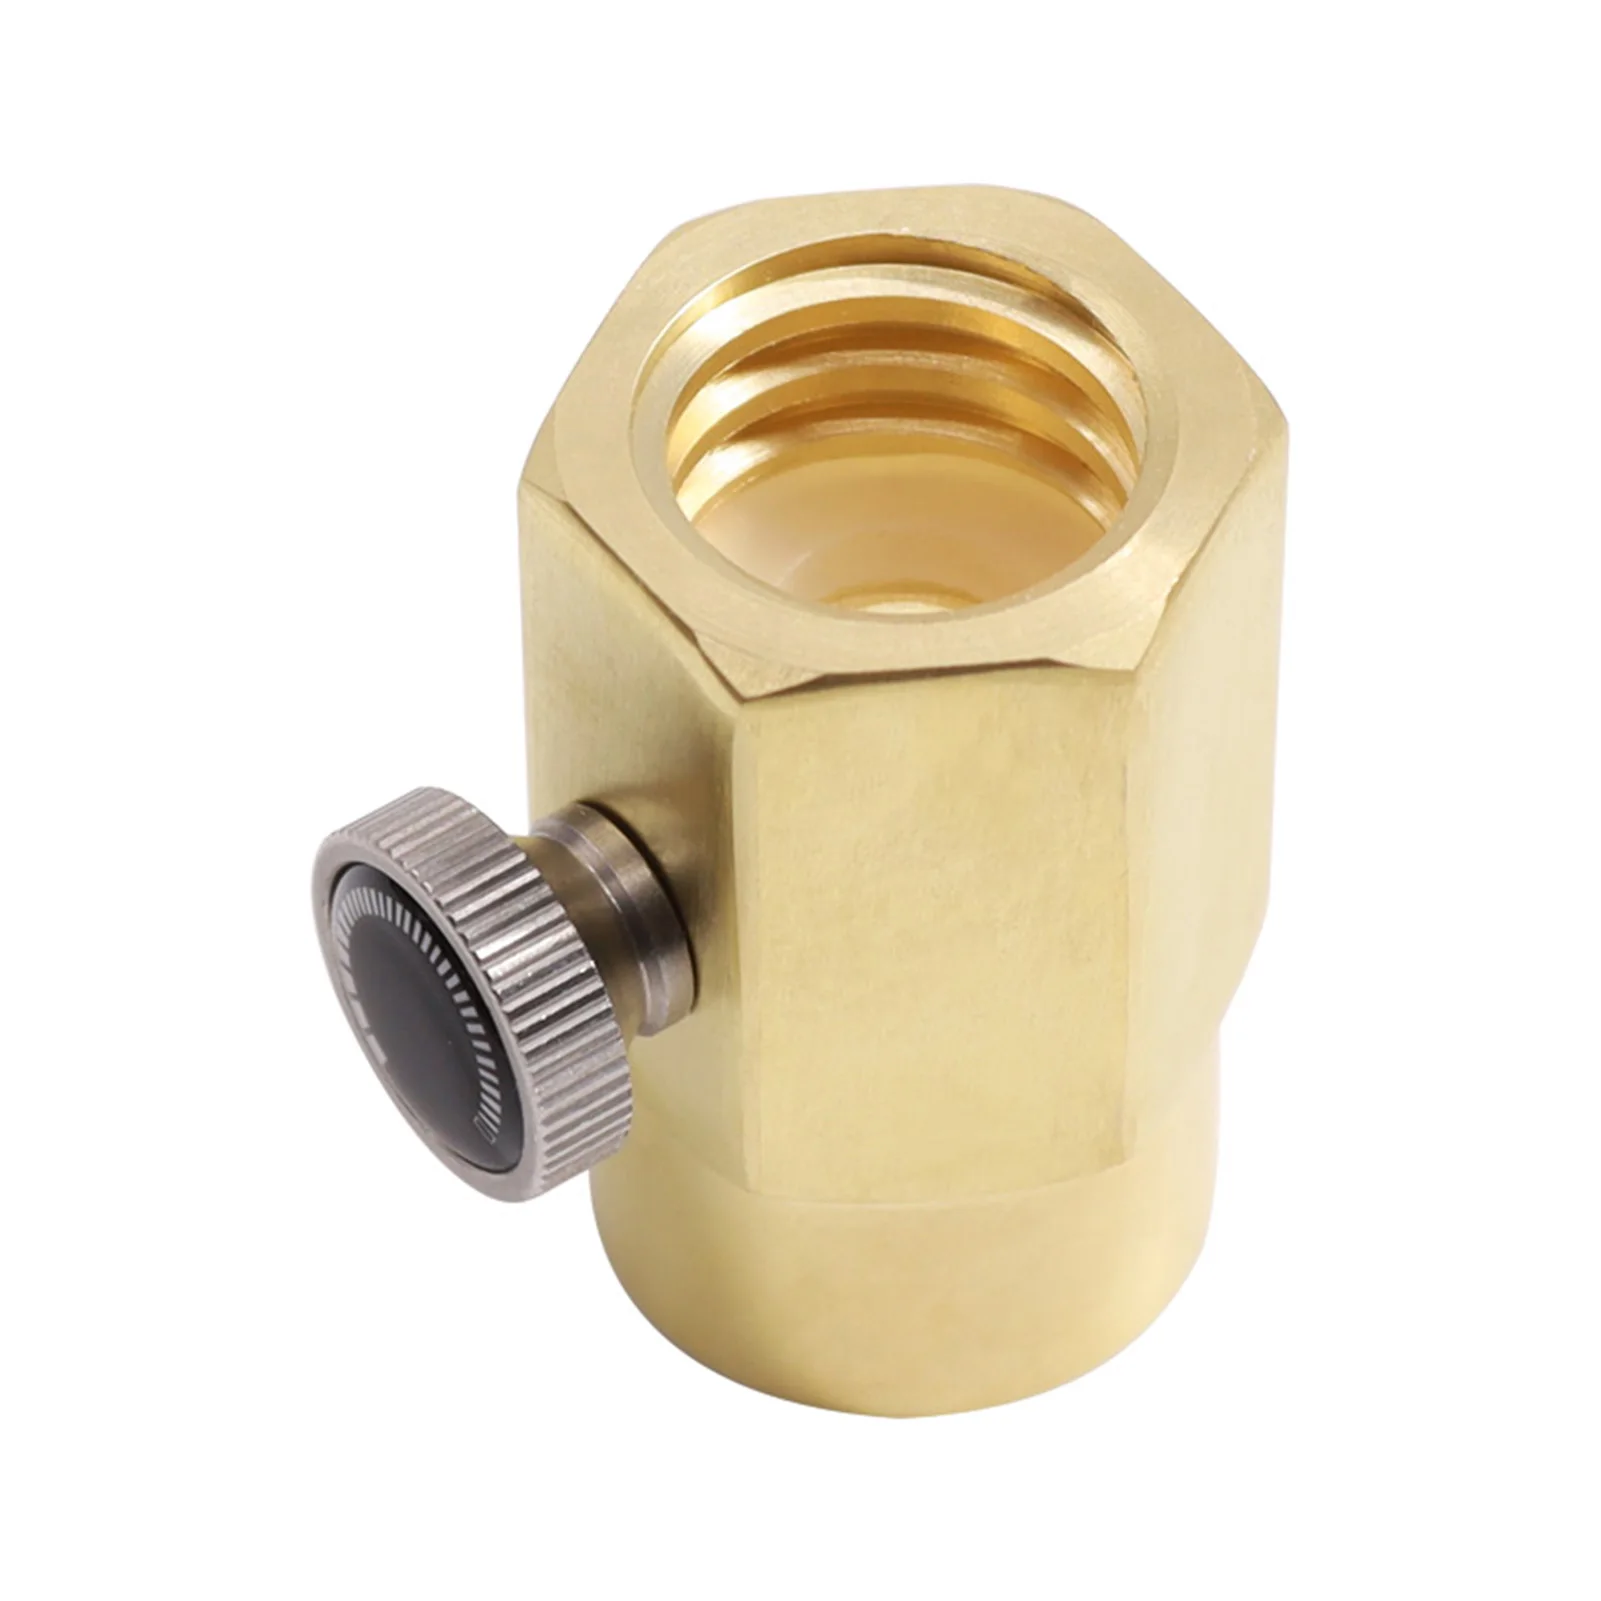 Oumefar CO2 Soda Connector TR21-4 to CGA320 Brass Soda Bottle Adapter CO2 Fill Valve Connector Fittings Filling Accessory Wear-resistant Filling Valve Connector 